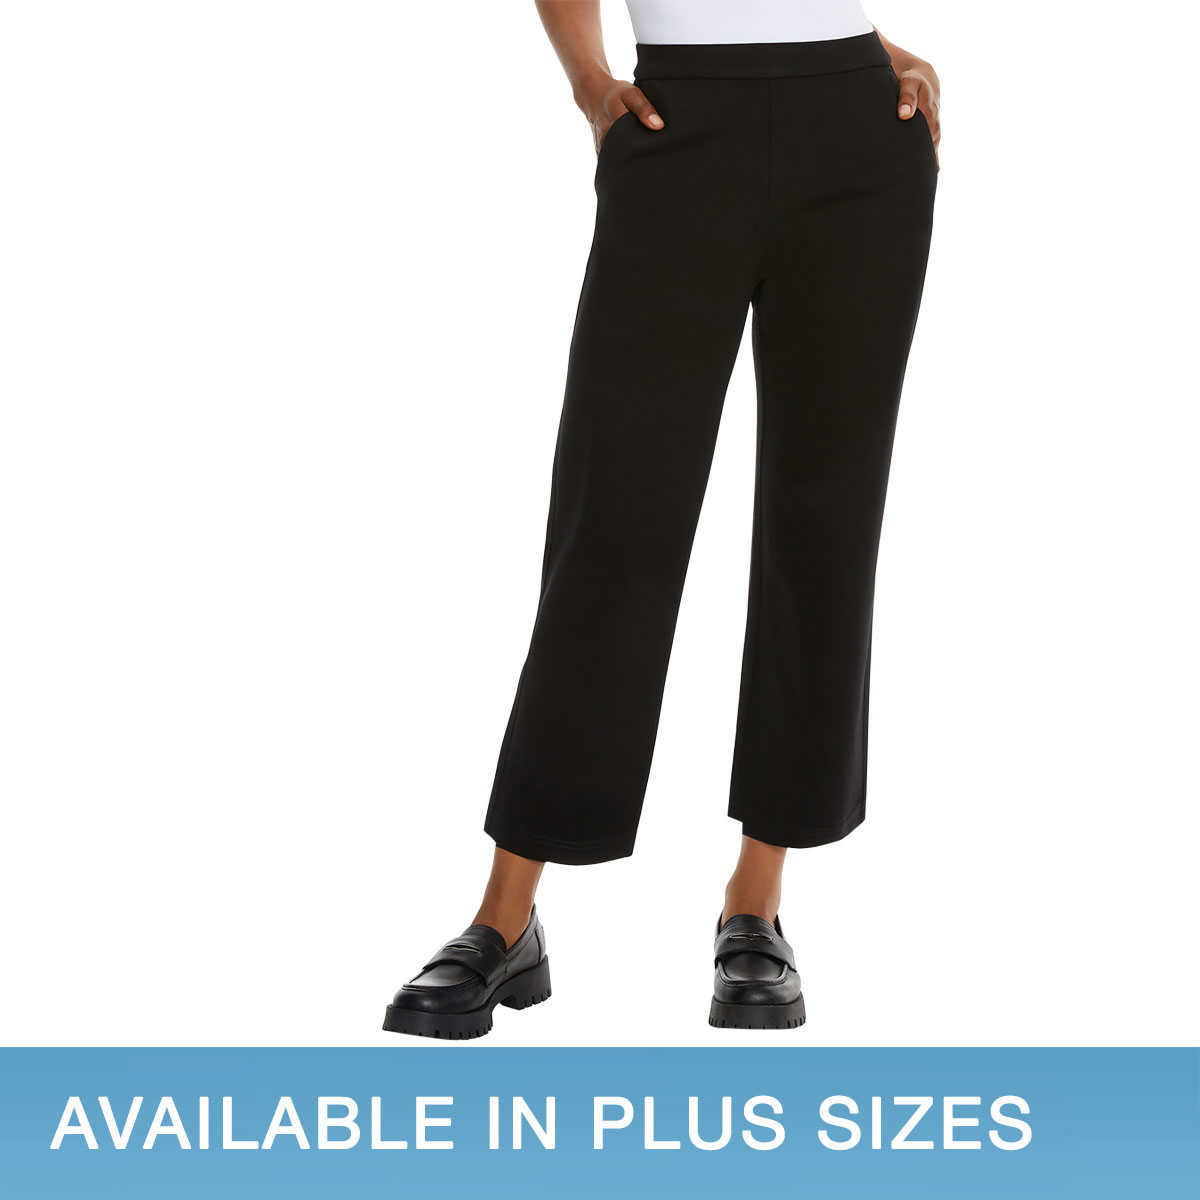 Ladies Ankle Length Pants Manufacturers  Women Ankle Length Pants  Suppliers Exporters